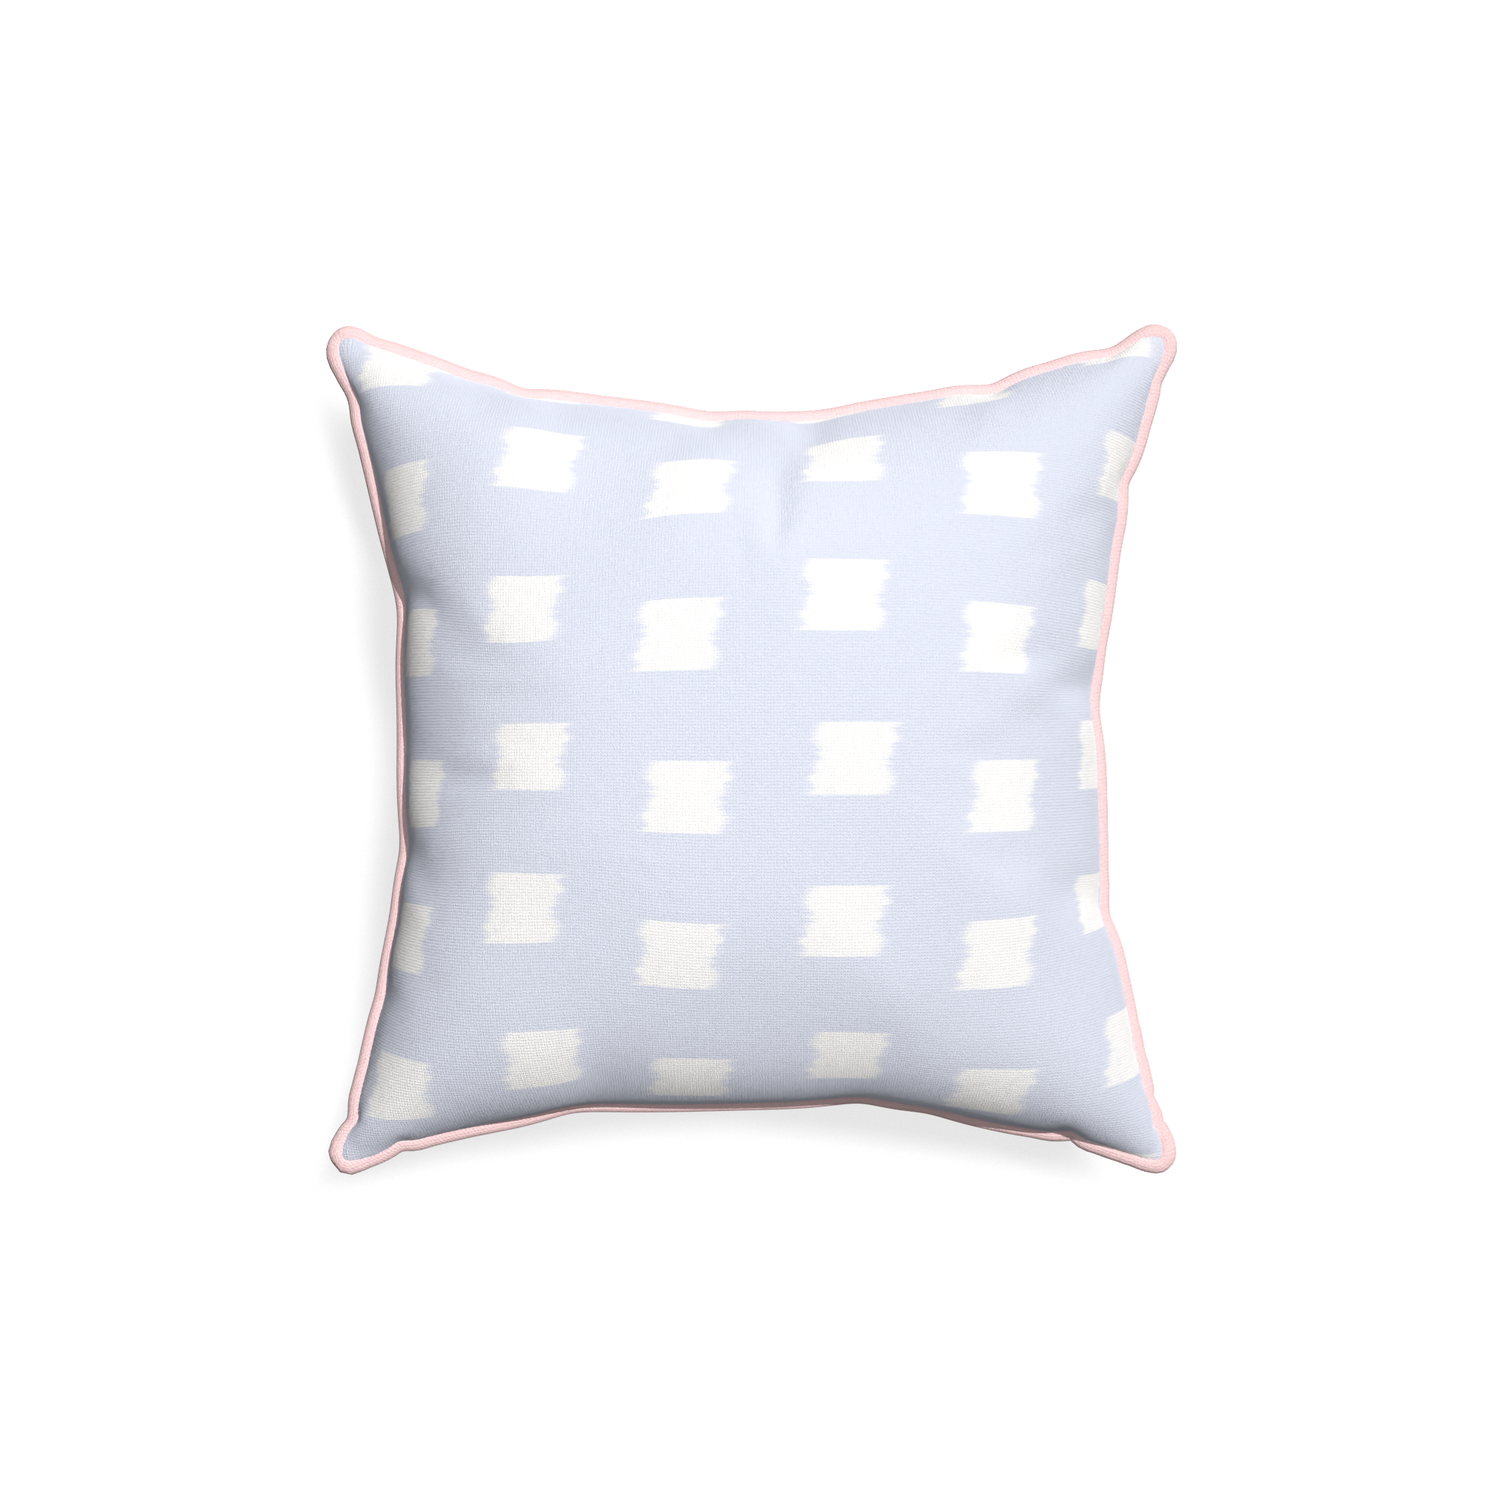 18-square denton custom pillow with petal piping on white background